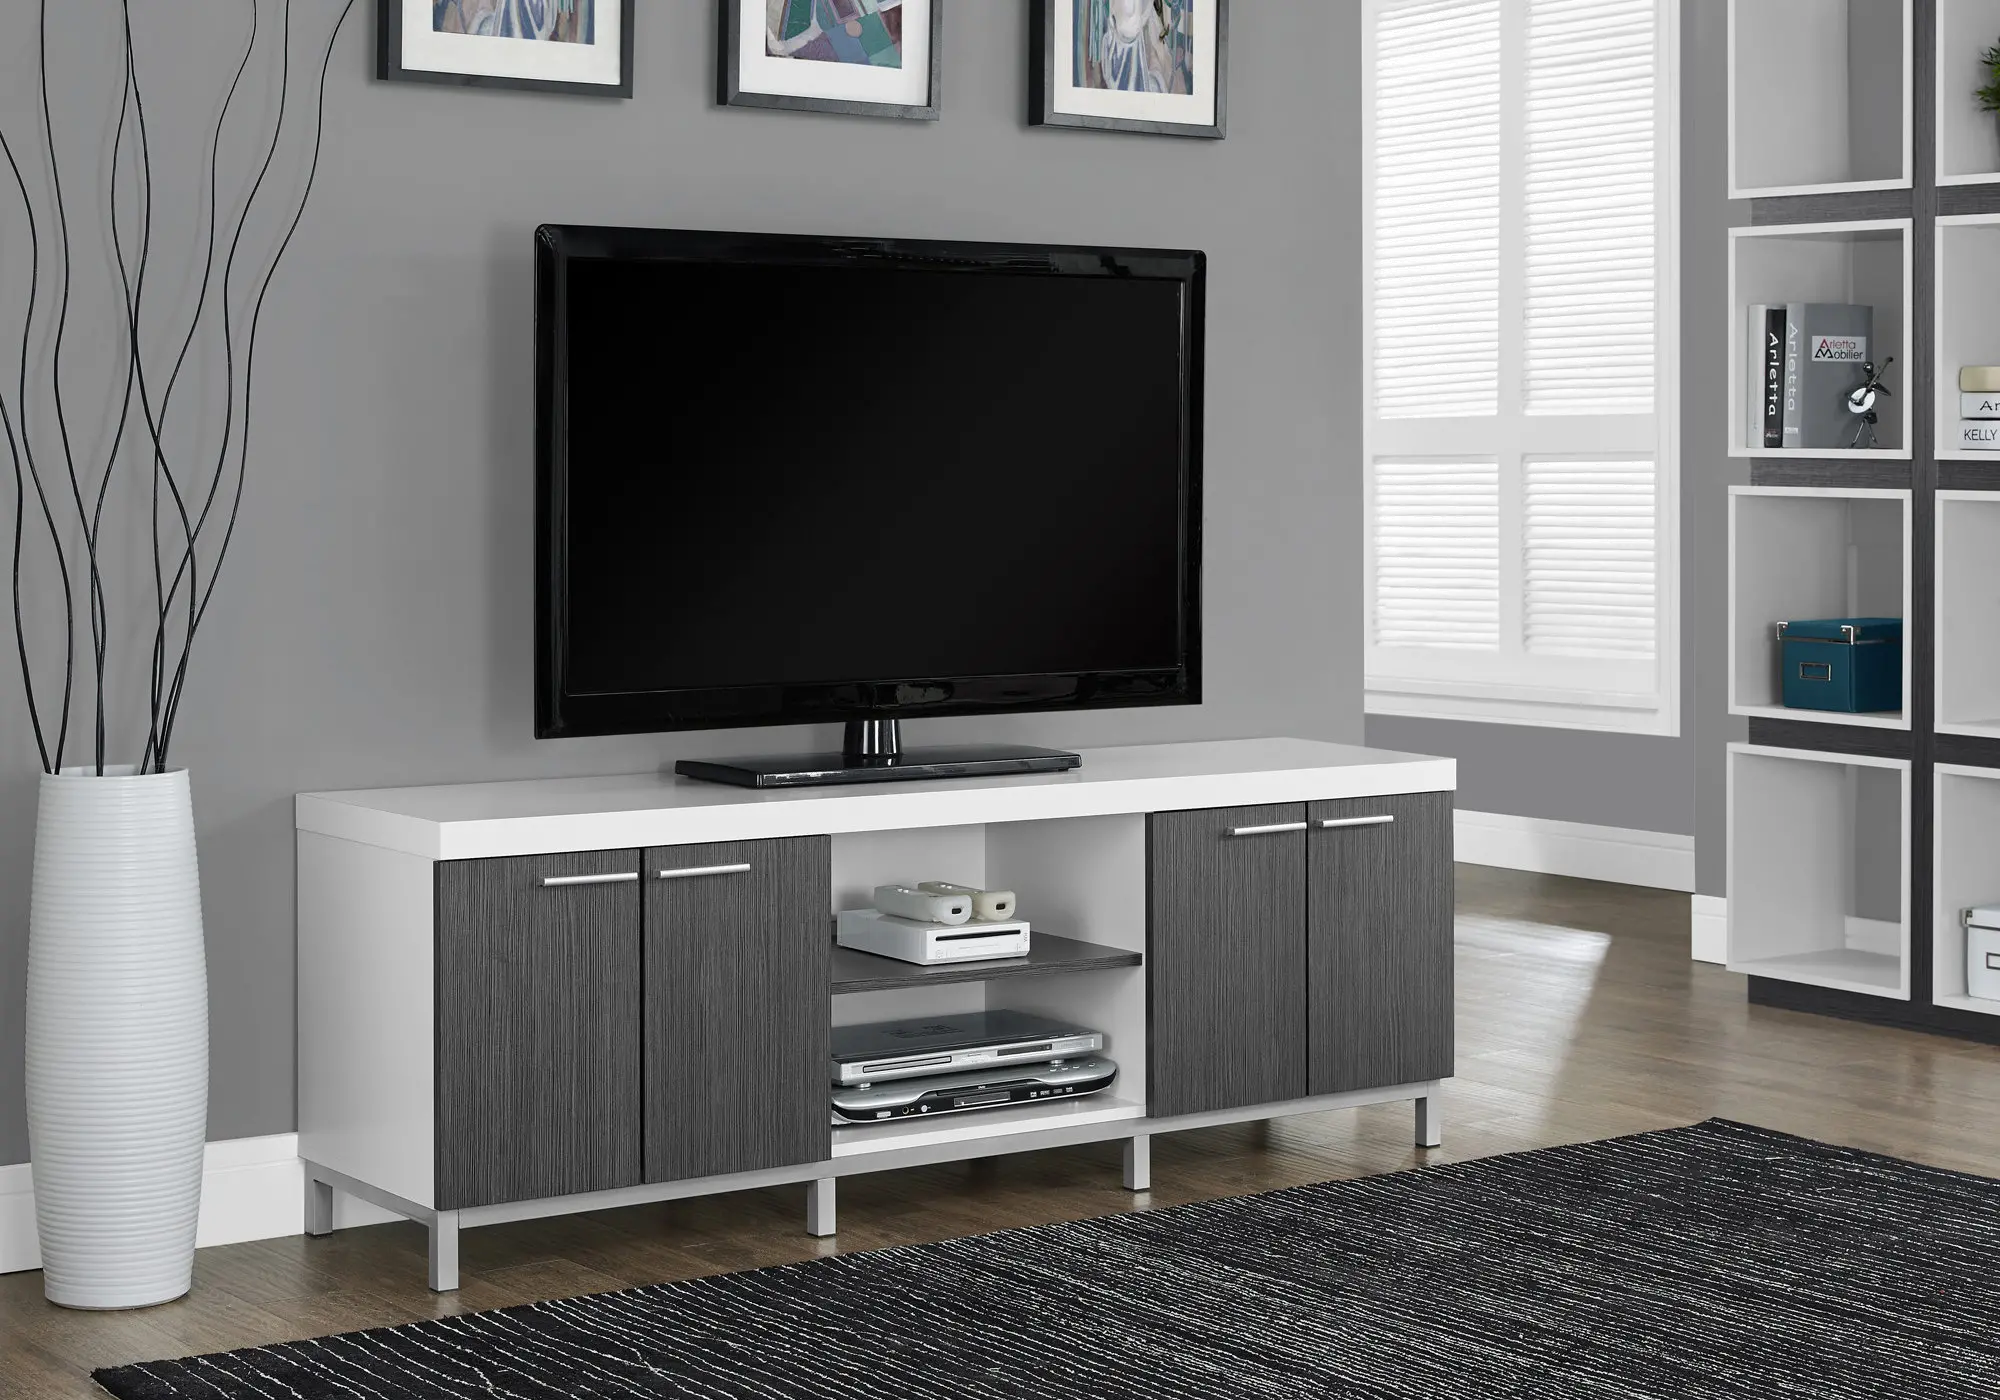 Photos - Mount/Stand Monarch Specialties Contemporary 60 Inch White TV Stand I 2591 